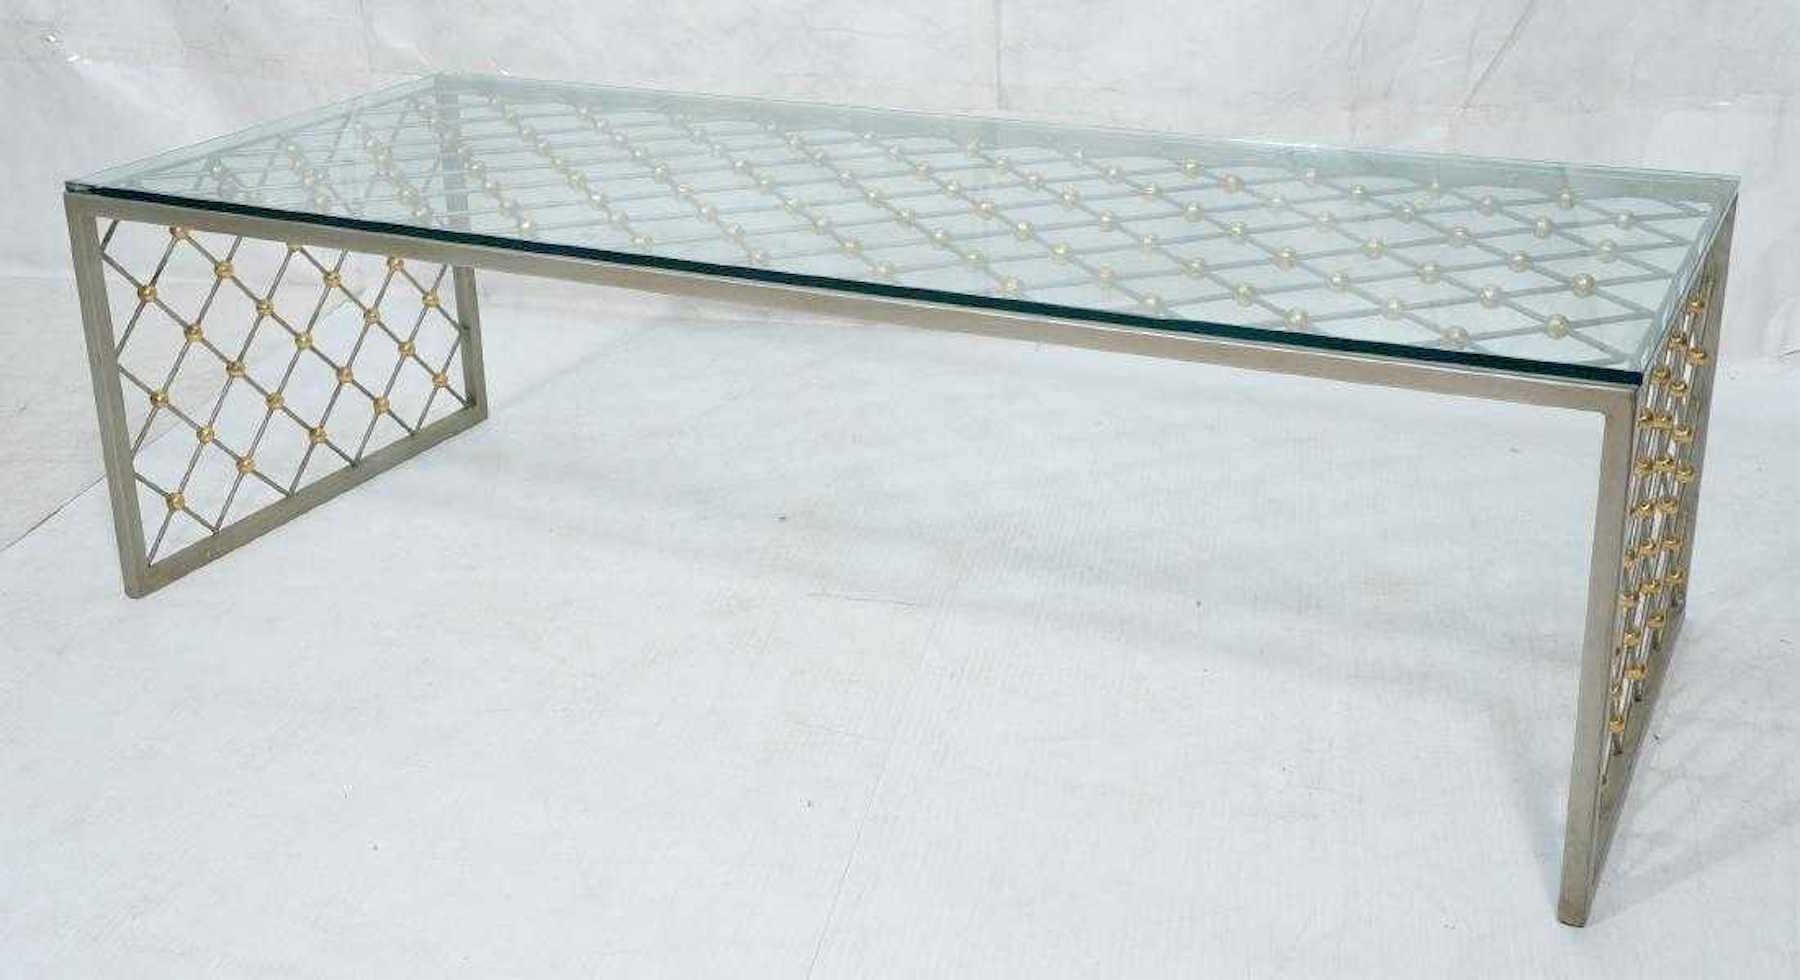 French Modern style steel and brass coffee table fantastic size and scale.